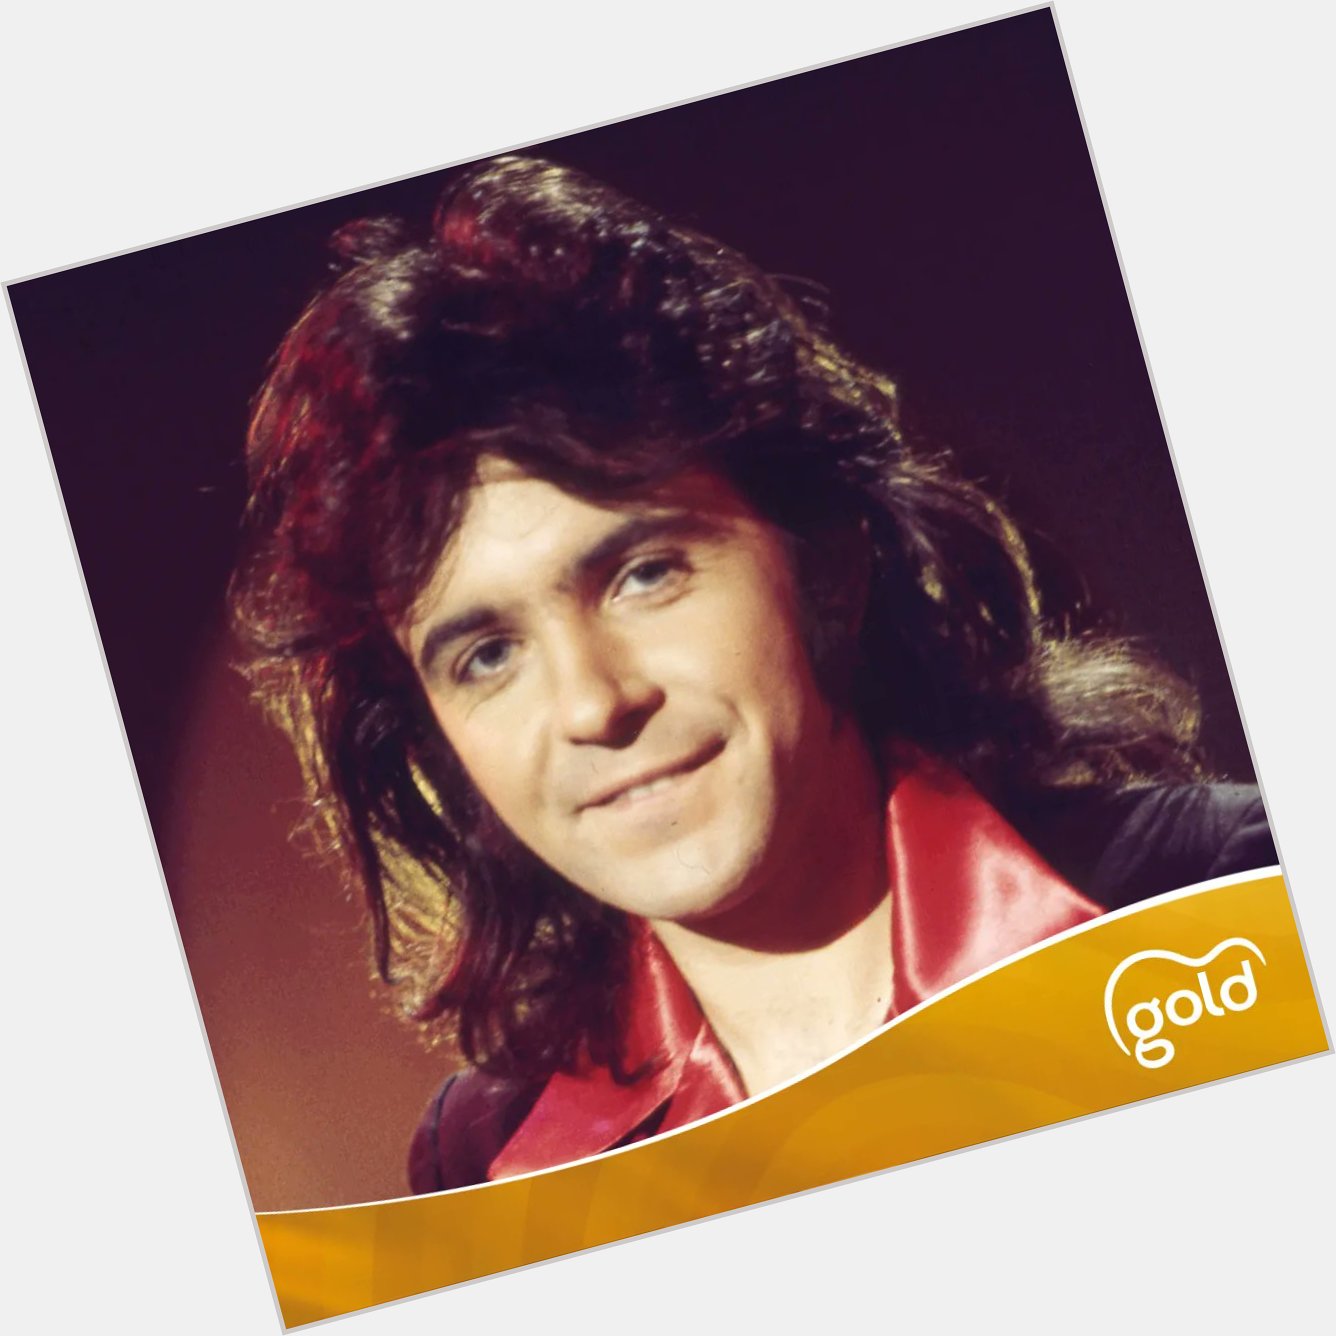 Happy 75th birthday to the one and only David Essex! 